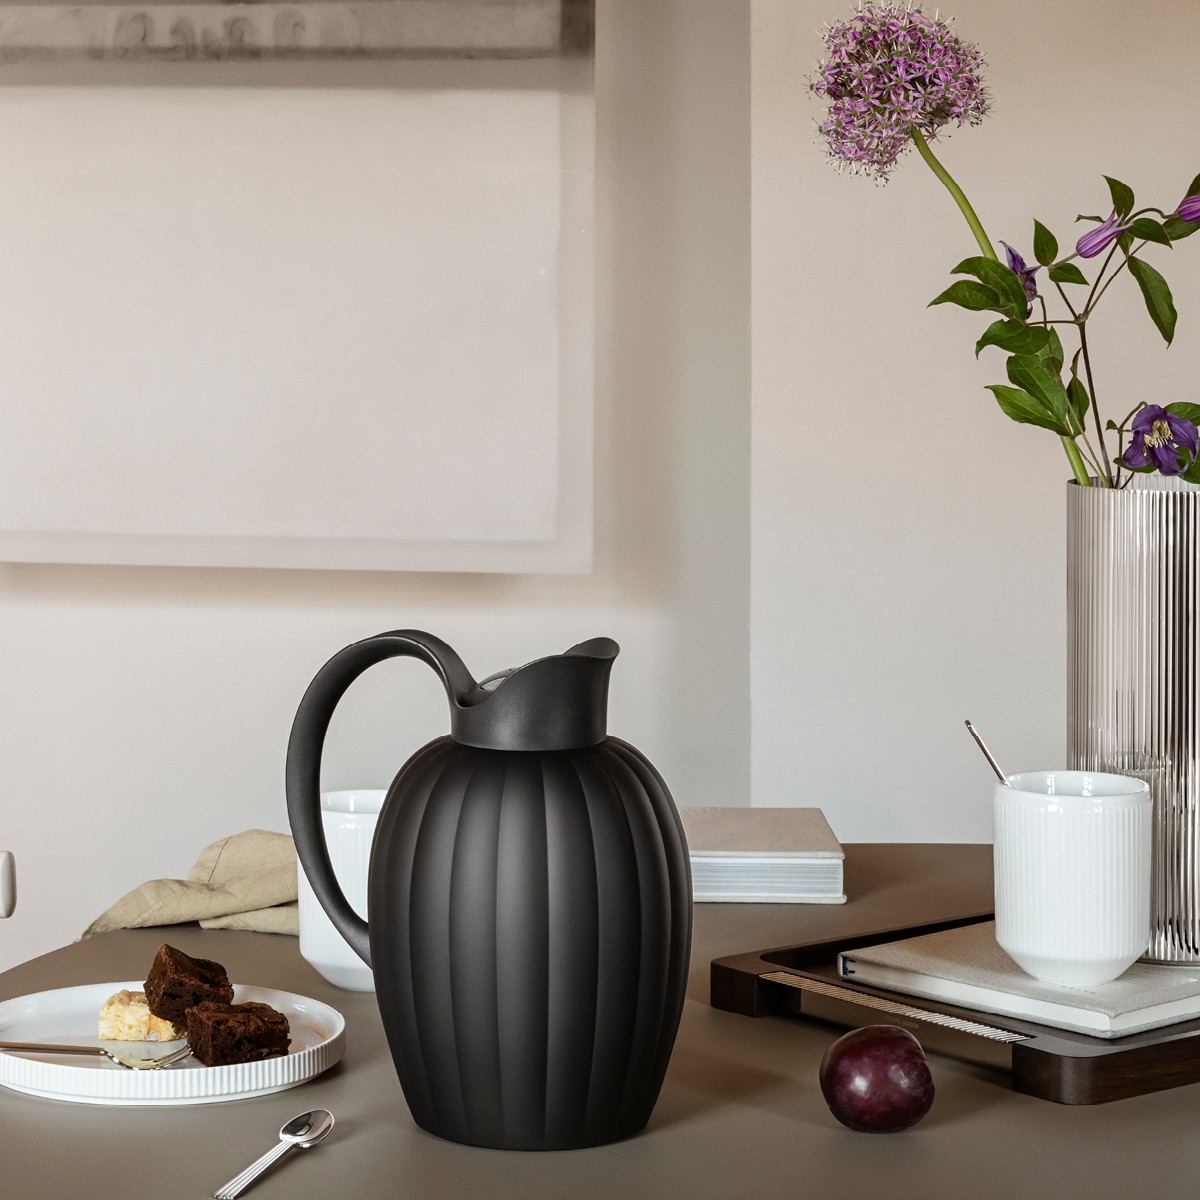 https://res.cloudinary.com/georgjensen/image/upload/f_auto,dpr_2/w_auto,c_scale/products/images/hi-res/10019591_10019192_GJ_AW22_HOME_BERNADOTTE_1?_i=AG